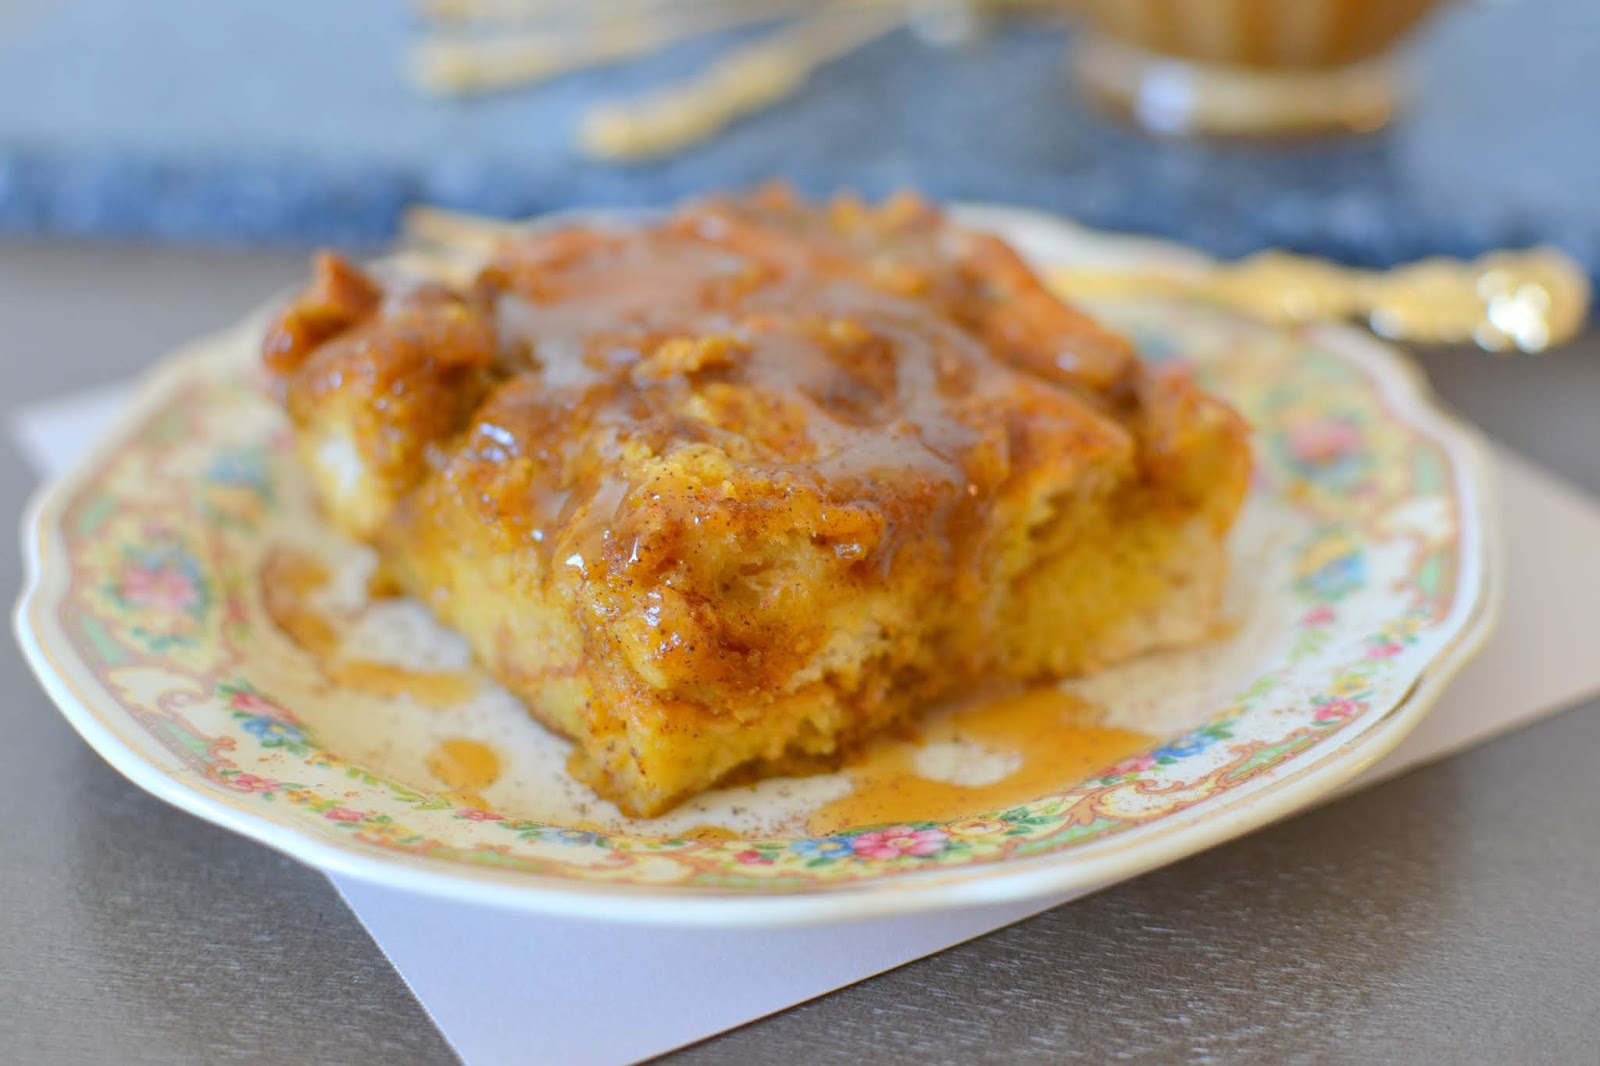 The ultimate fall dessert! This bread pudding is great for Thanksgiving, game day celebrations or any fall or holiday party! We also love it for breakfast or brunch!